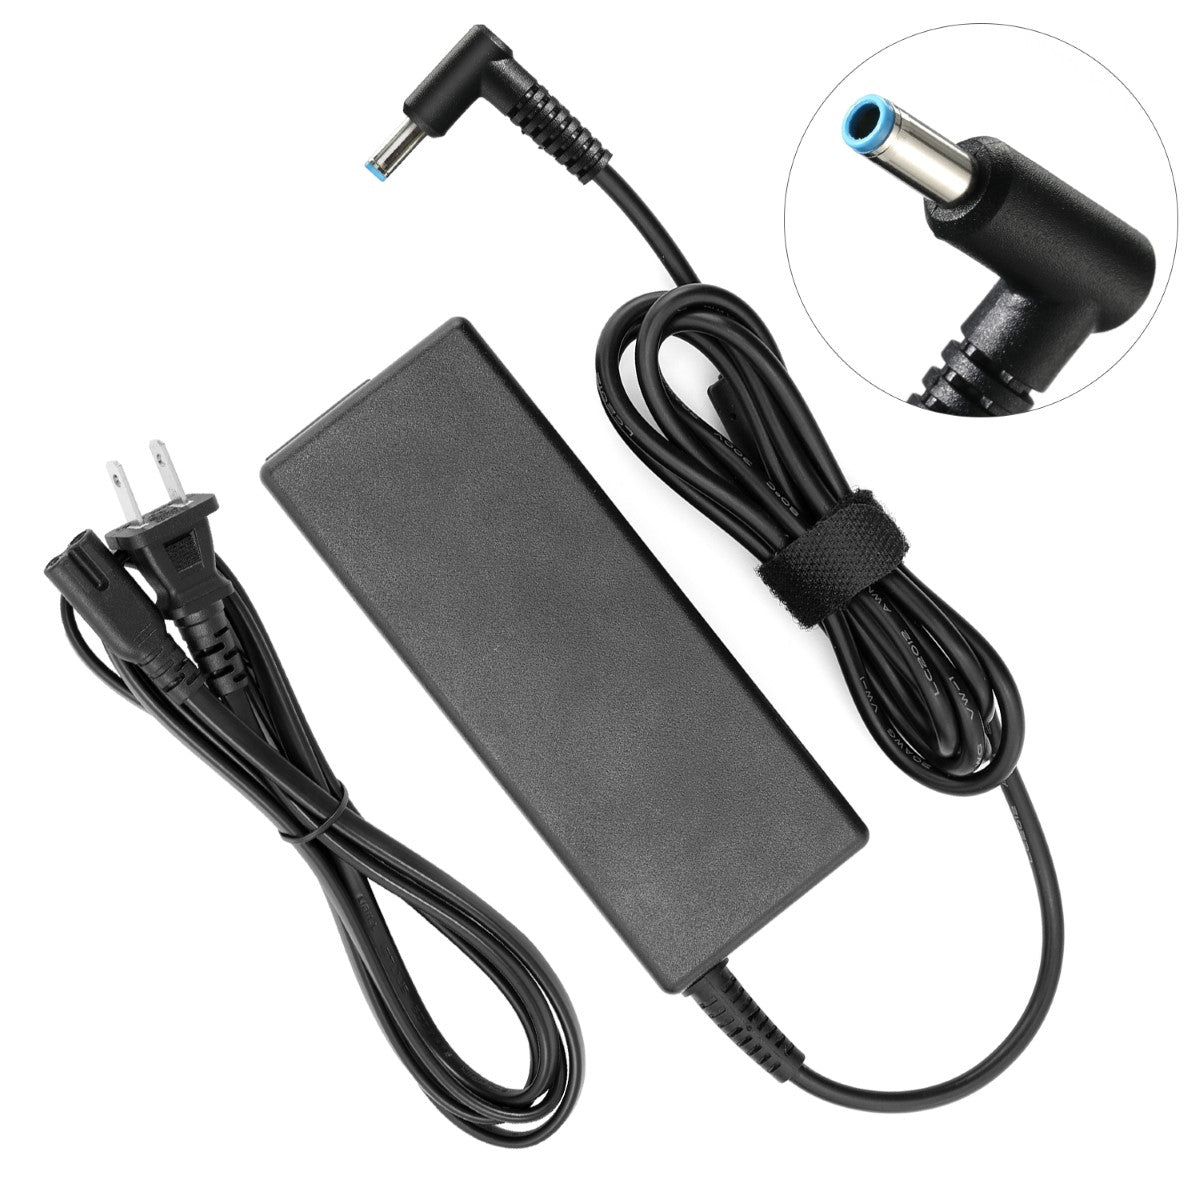 AC Adapter Charger for hp Envy Touchsmart 15-k178nr Notebook.